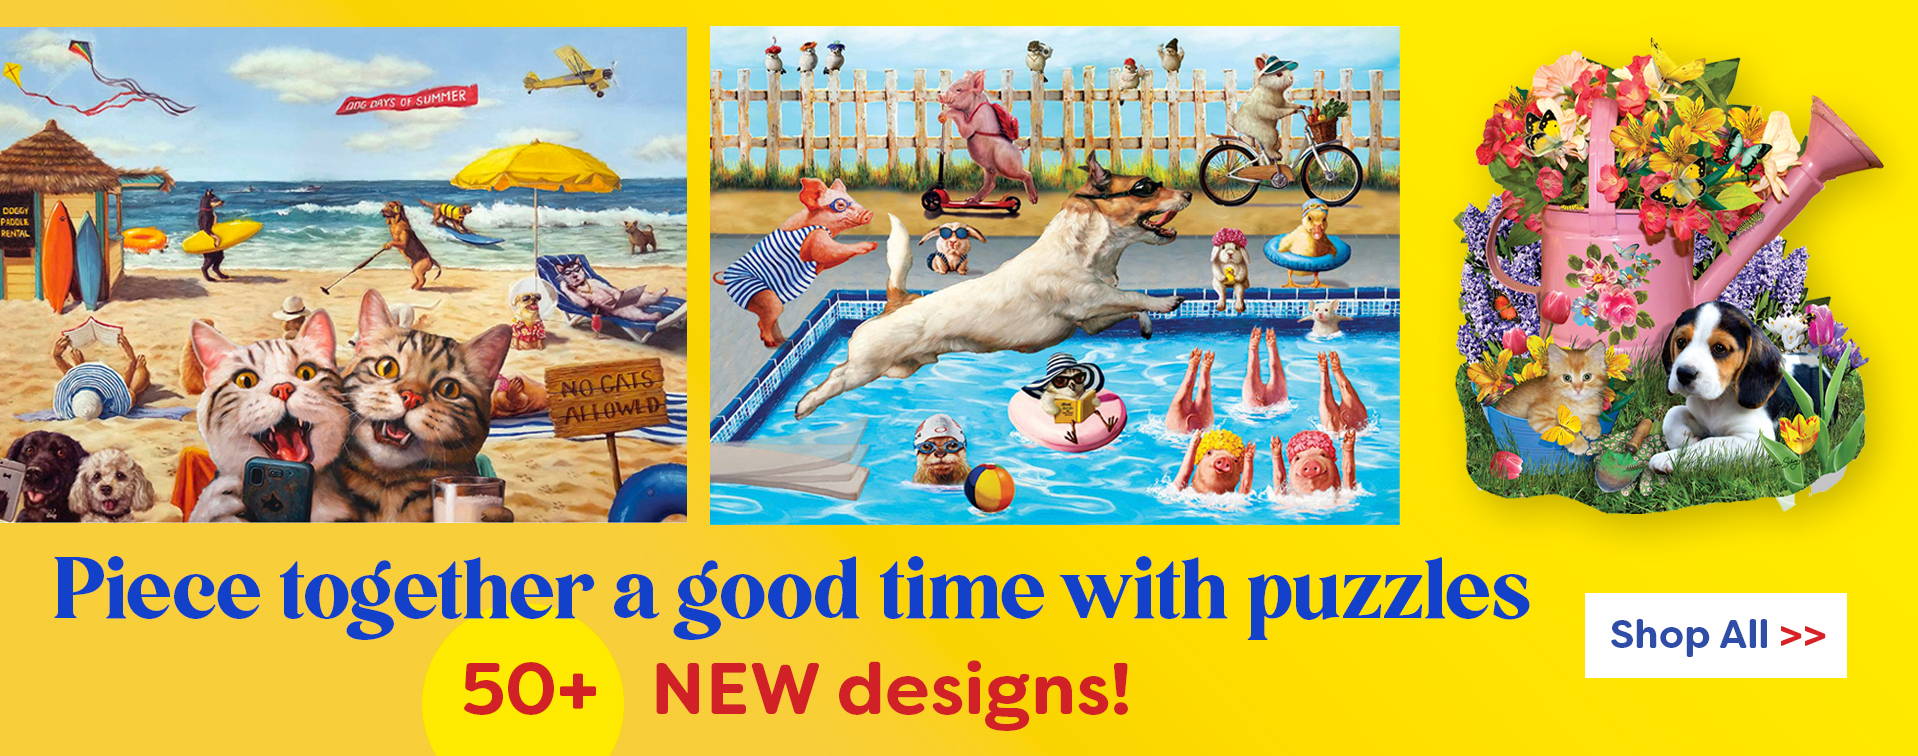 Piece together a good time with 50 new puzzle designs! Image: Featured new puzzle arrivals.